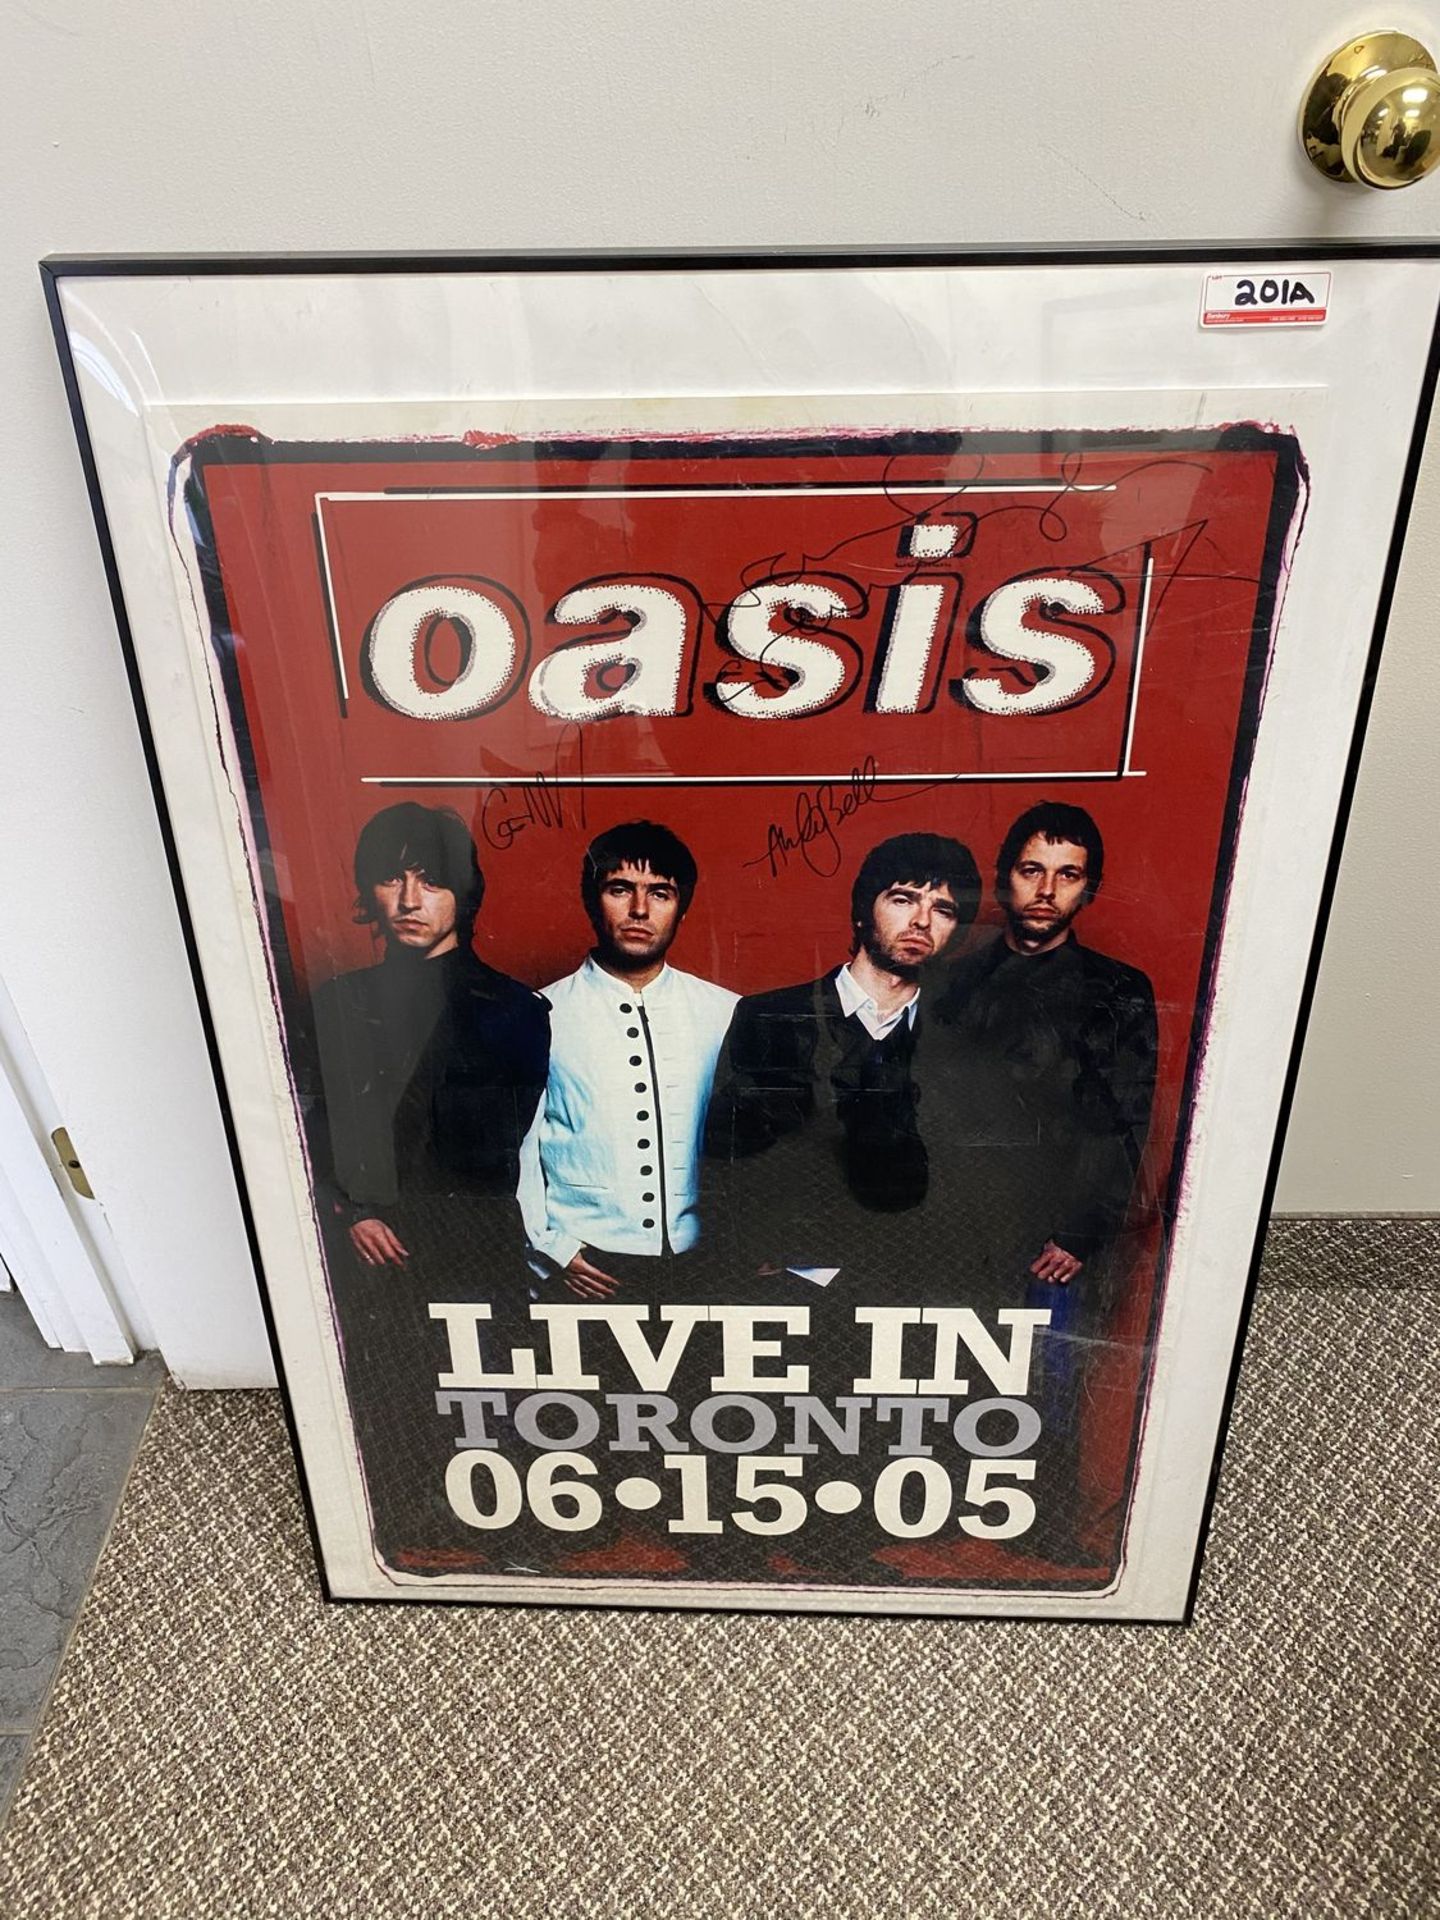 AUTOGRAPHED OASIS POSTER - TORONTO 06-15-05